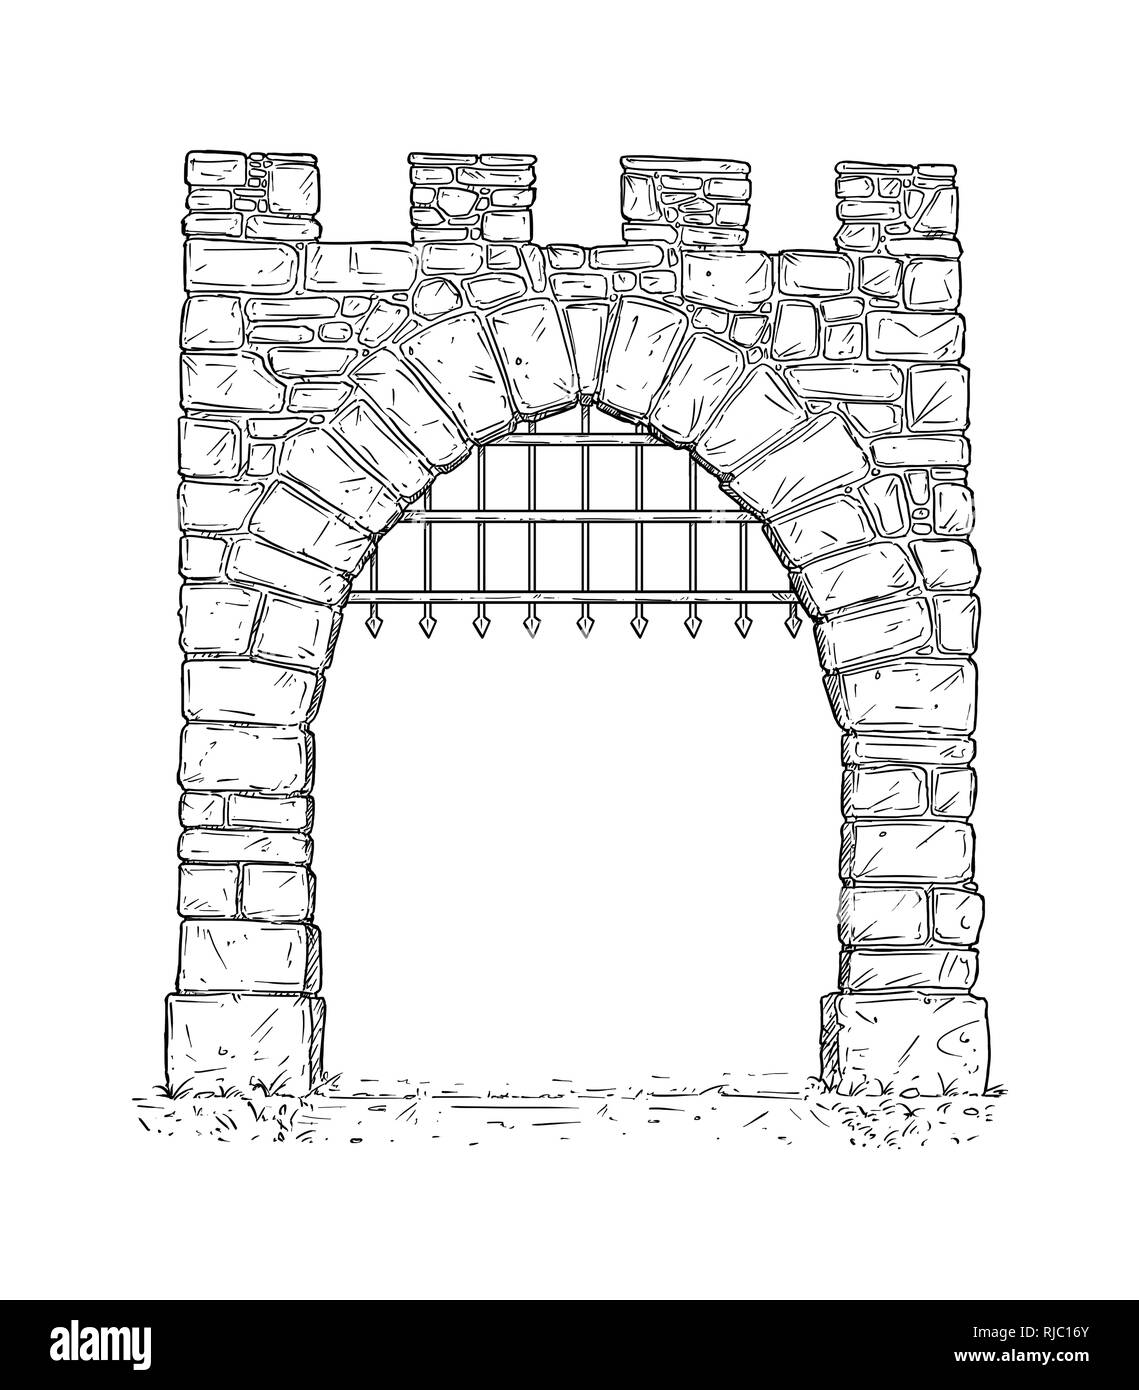 Cartoon of Open Stone Medieval Decision Gate with Iron Bars Stock Photo